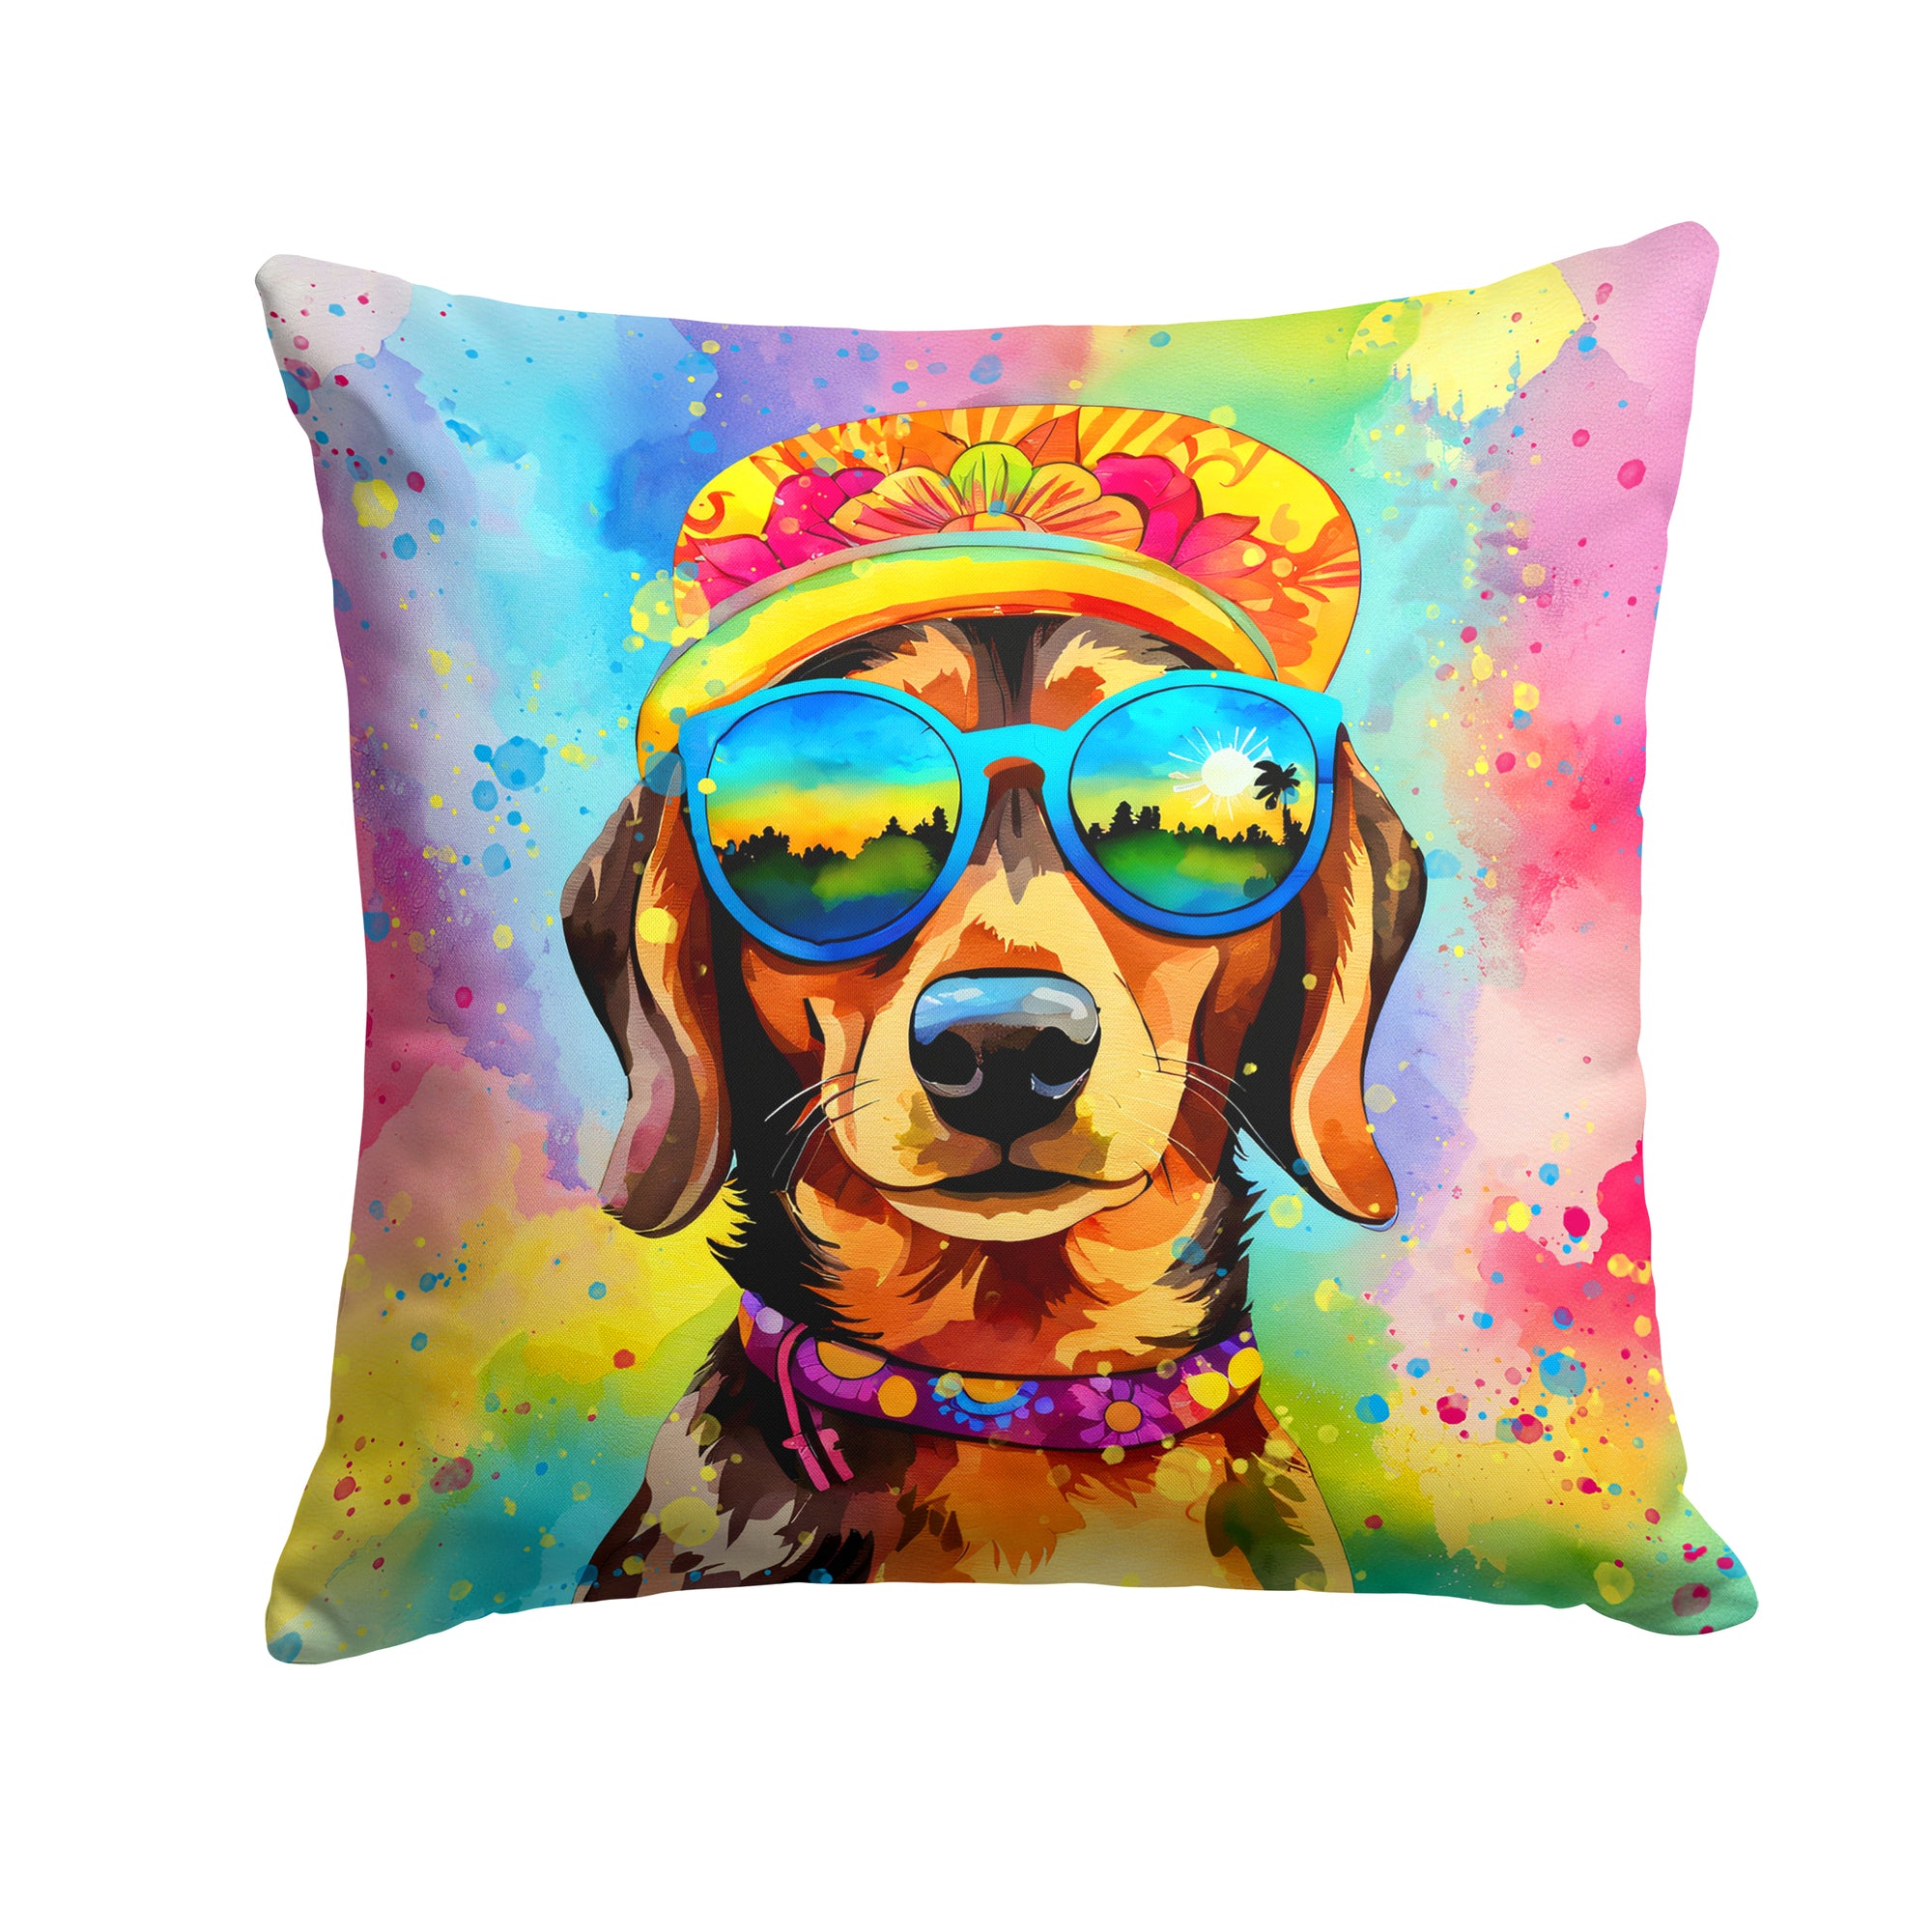 Buy this Dachshund Hippie Dawg Fabric Decorative Pillow